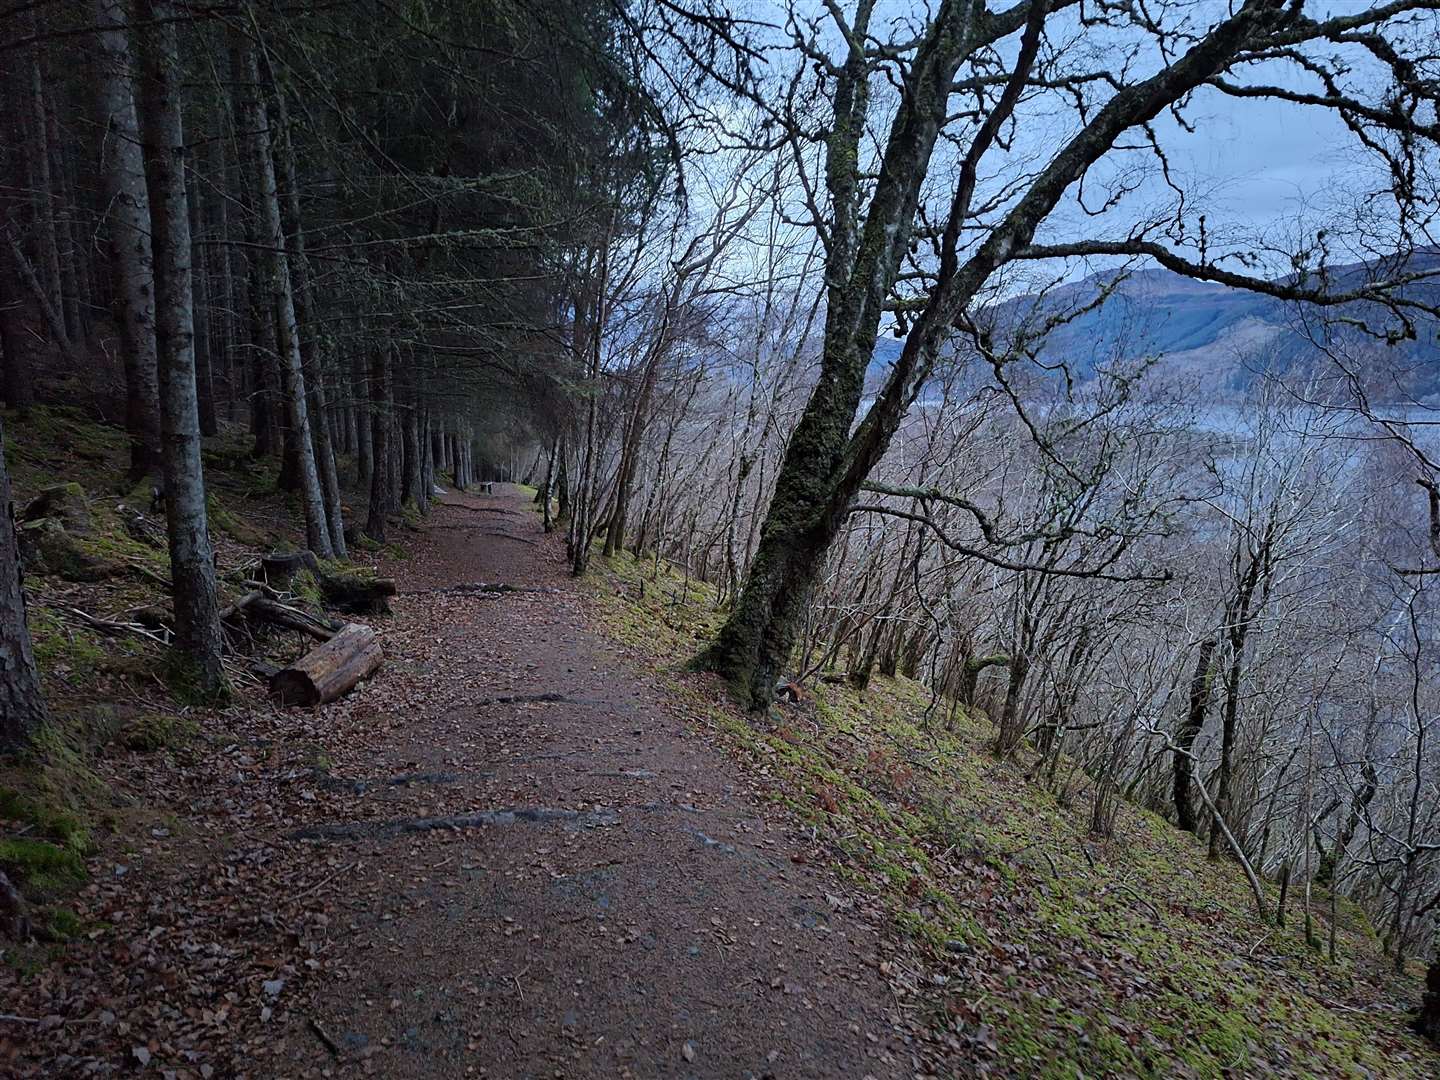 The long path that descends towards Foyers with a view through the trees to Loch Ness.